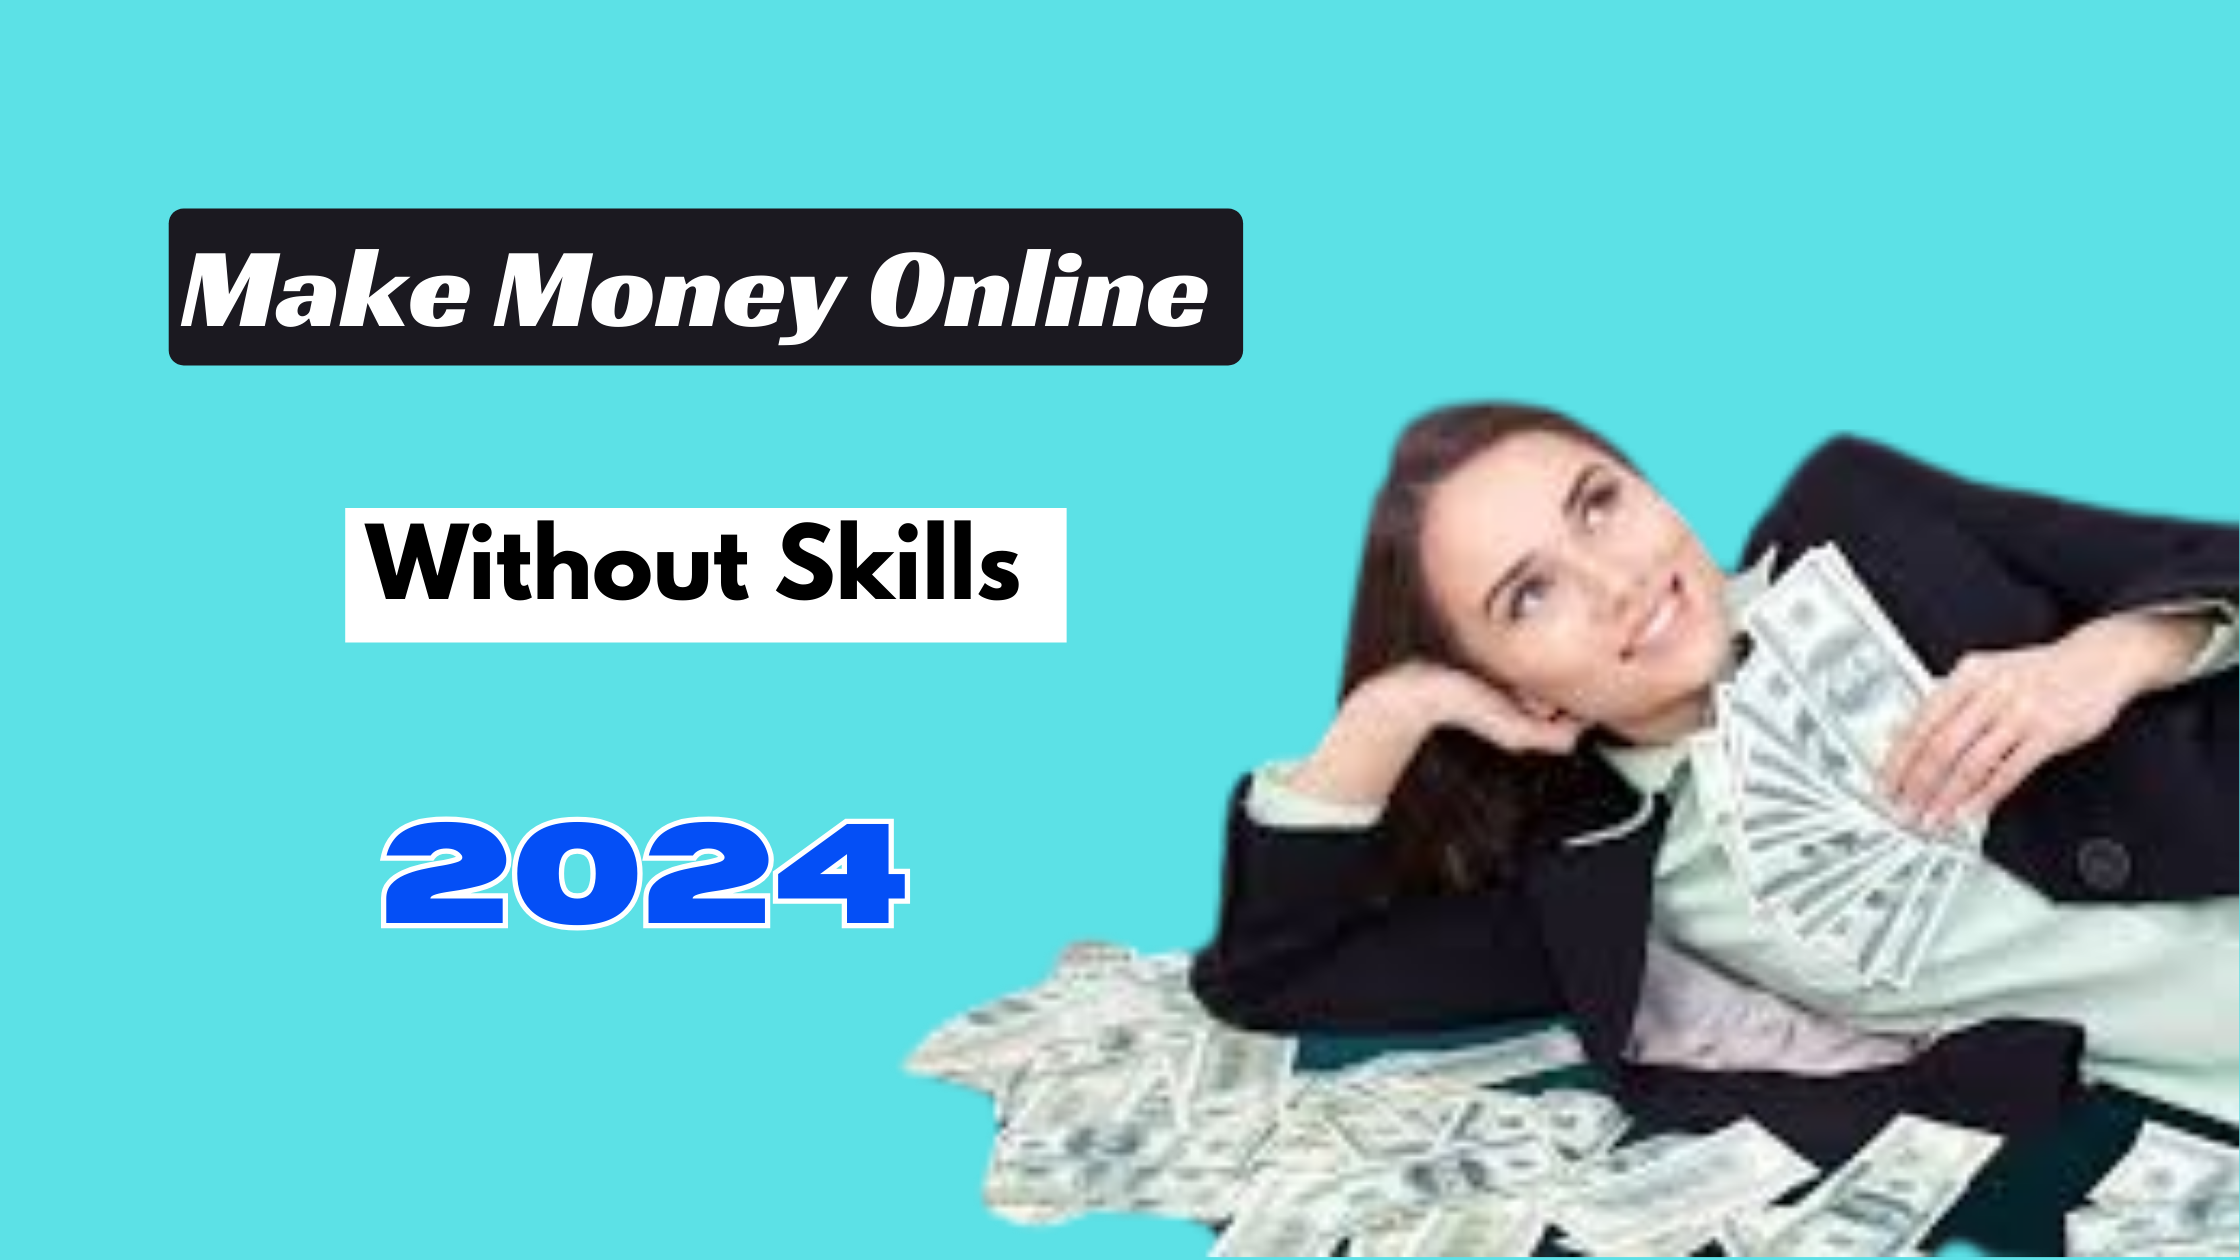 How To Make Money Online Without Skills In 2024